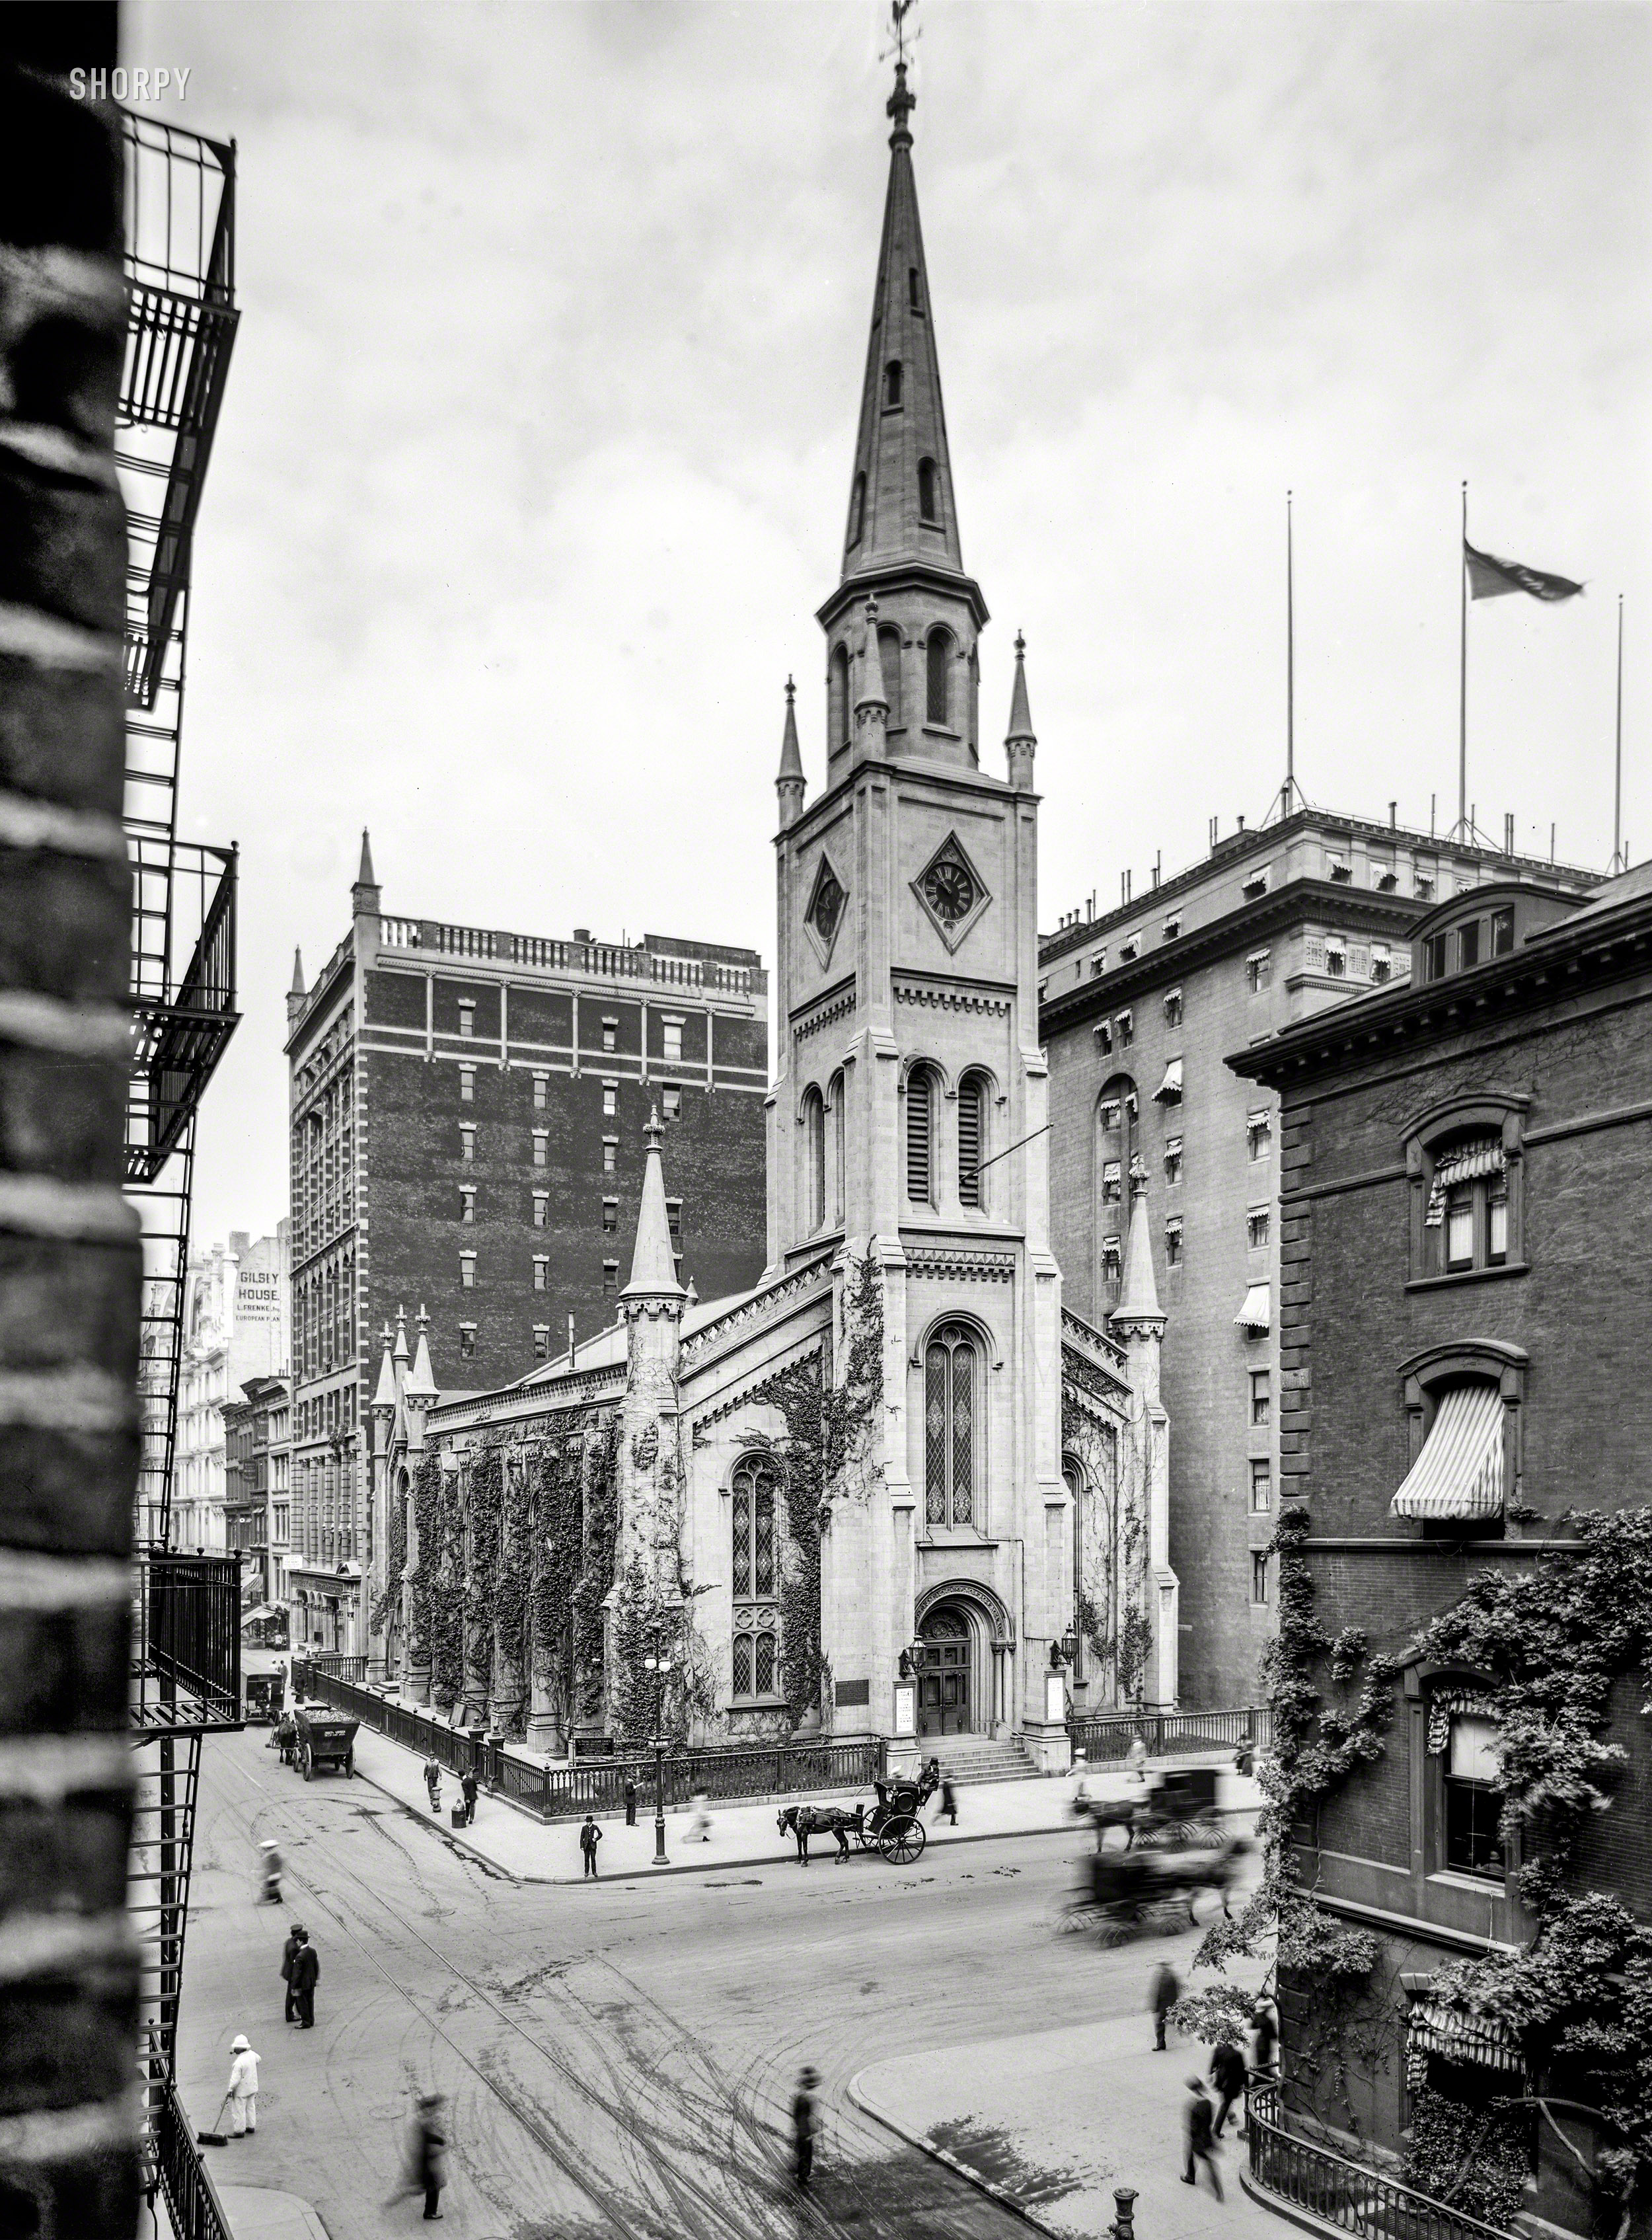 October 1907. "Marble Collegiate Church, Fifth Avenue, New York." Just a few minutes before this view was recorded, on what was evidently a busy corner for the Department of Sanitation. 8x10 inch glass negative. View full size.